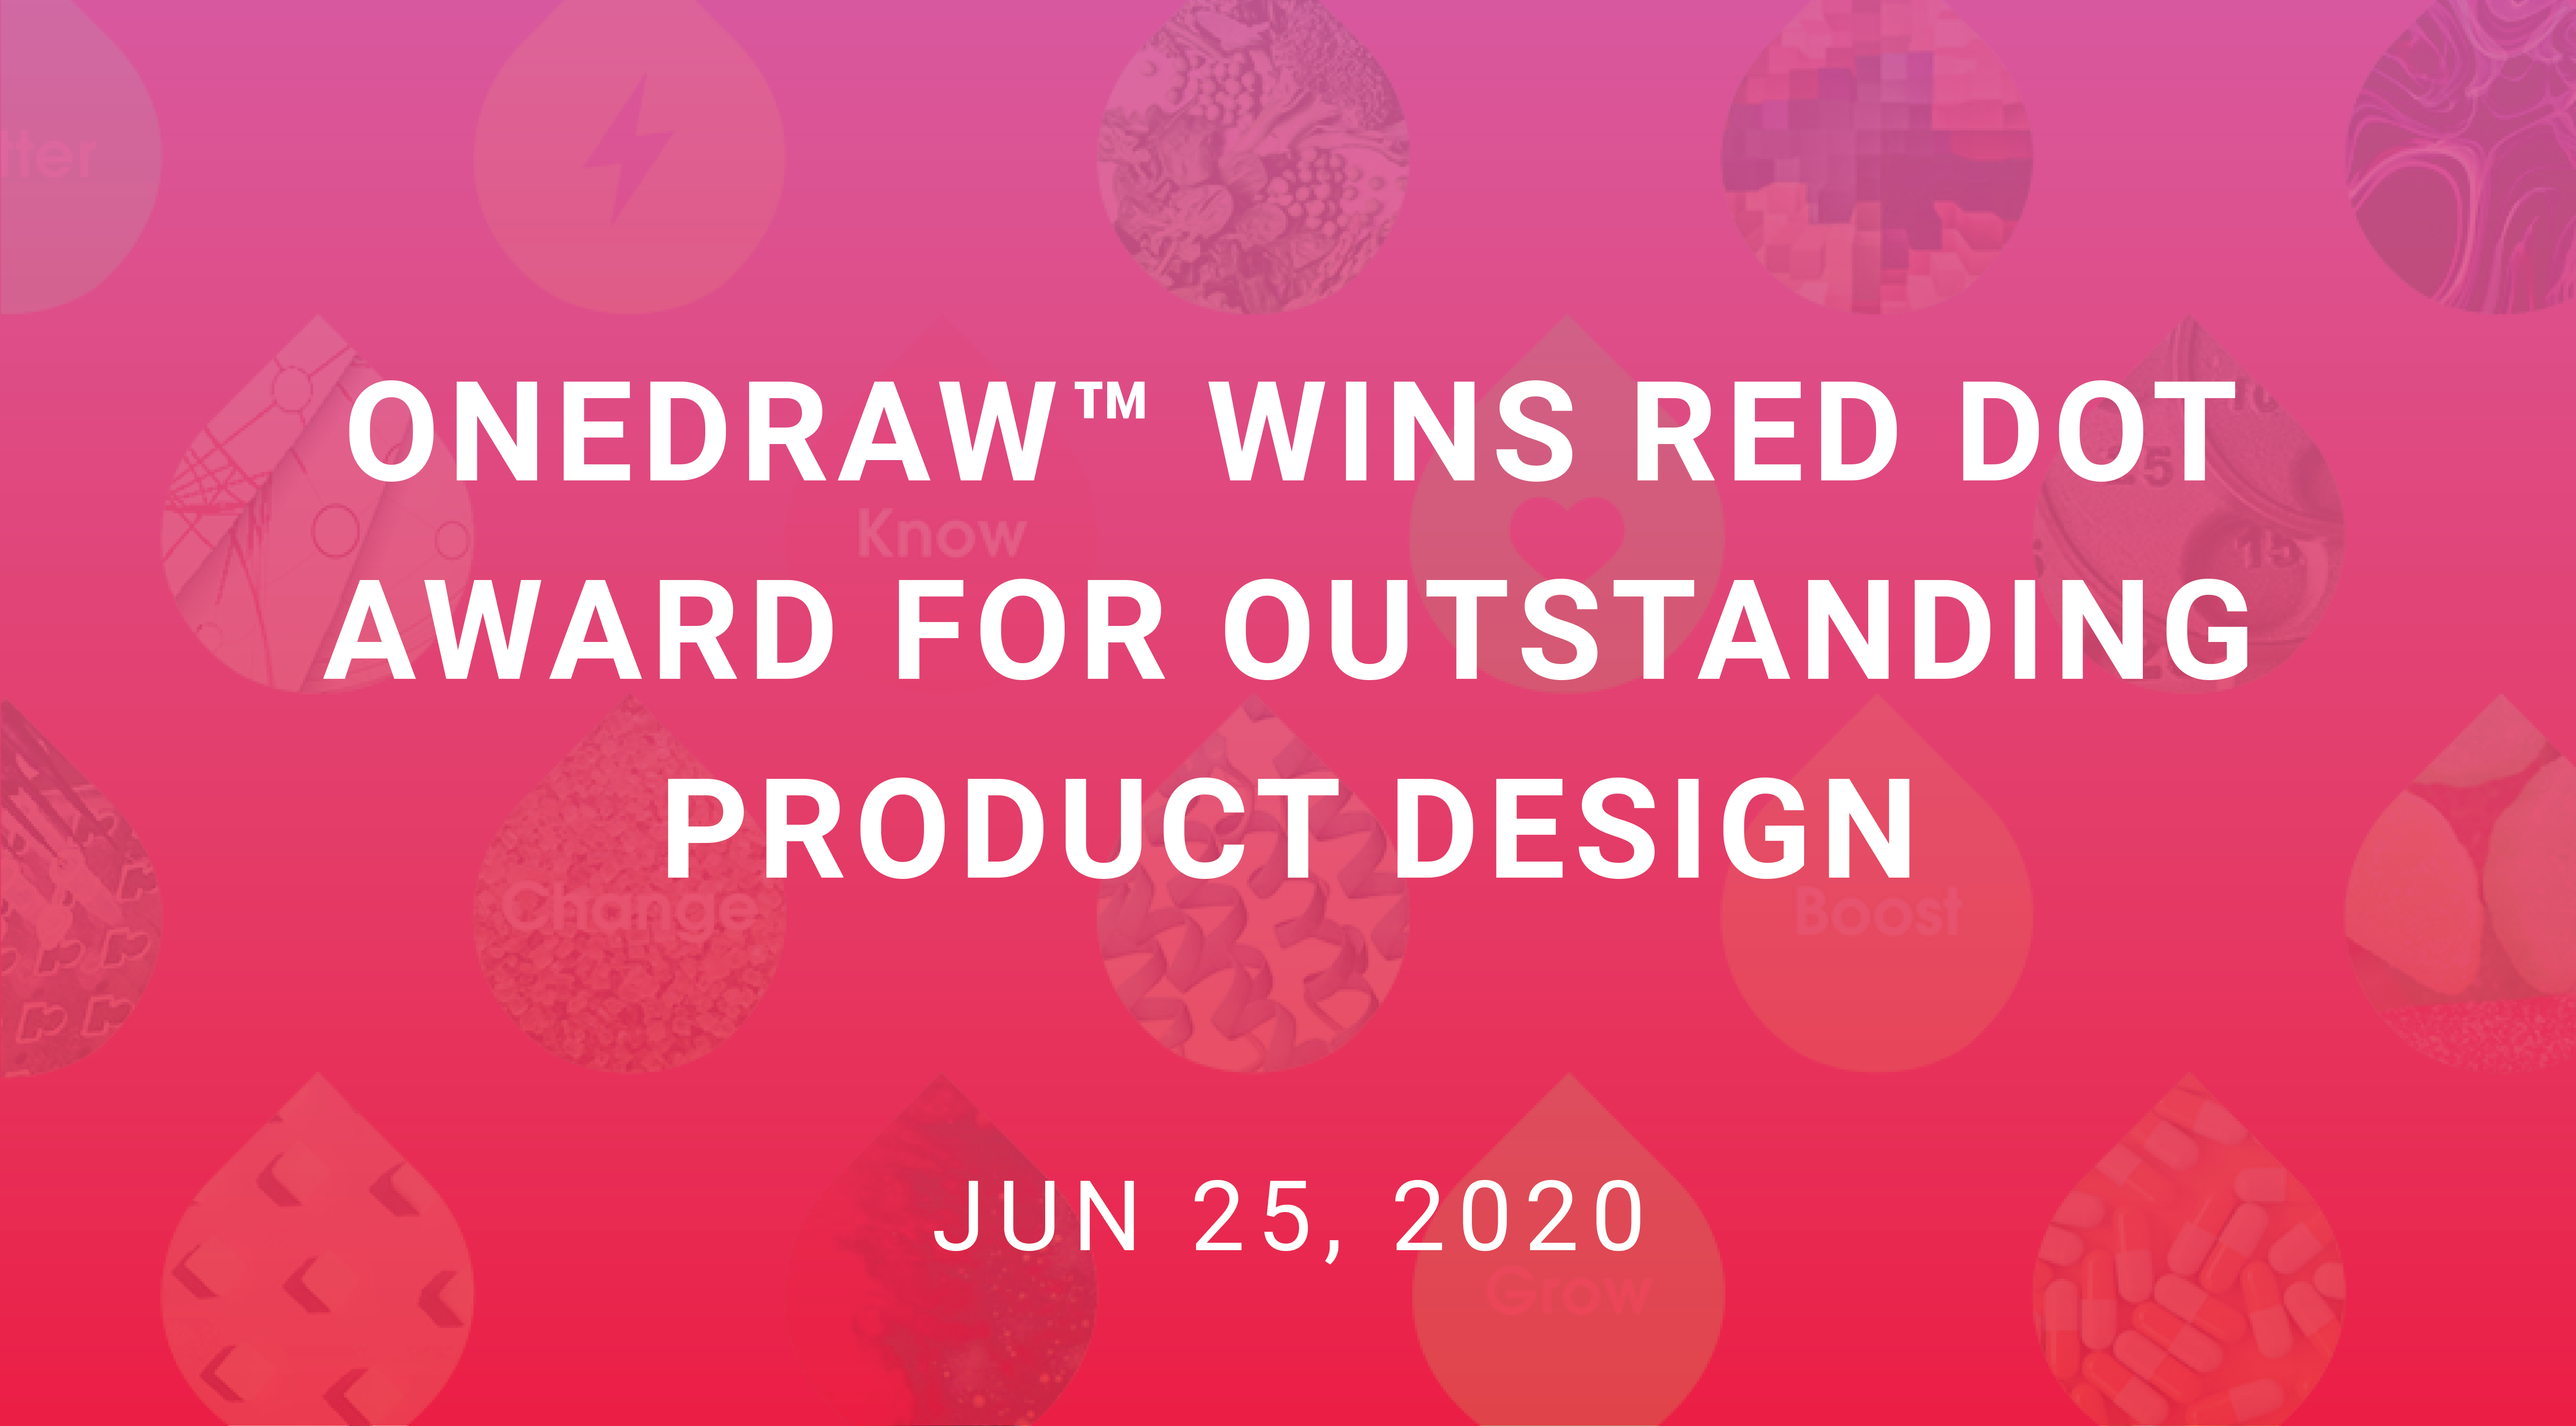 OneDraw™ Blood Collection Device Receives the Red Dot Award for Outstanding Medical Device Product Design 1